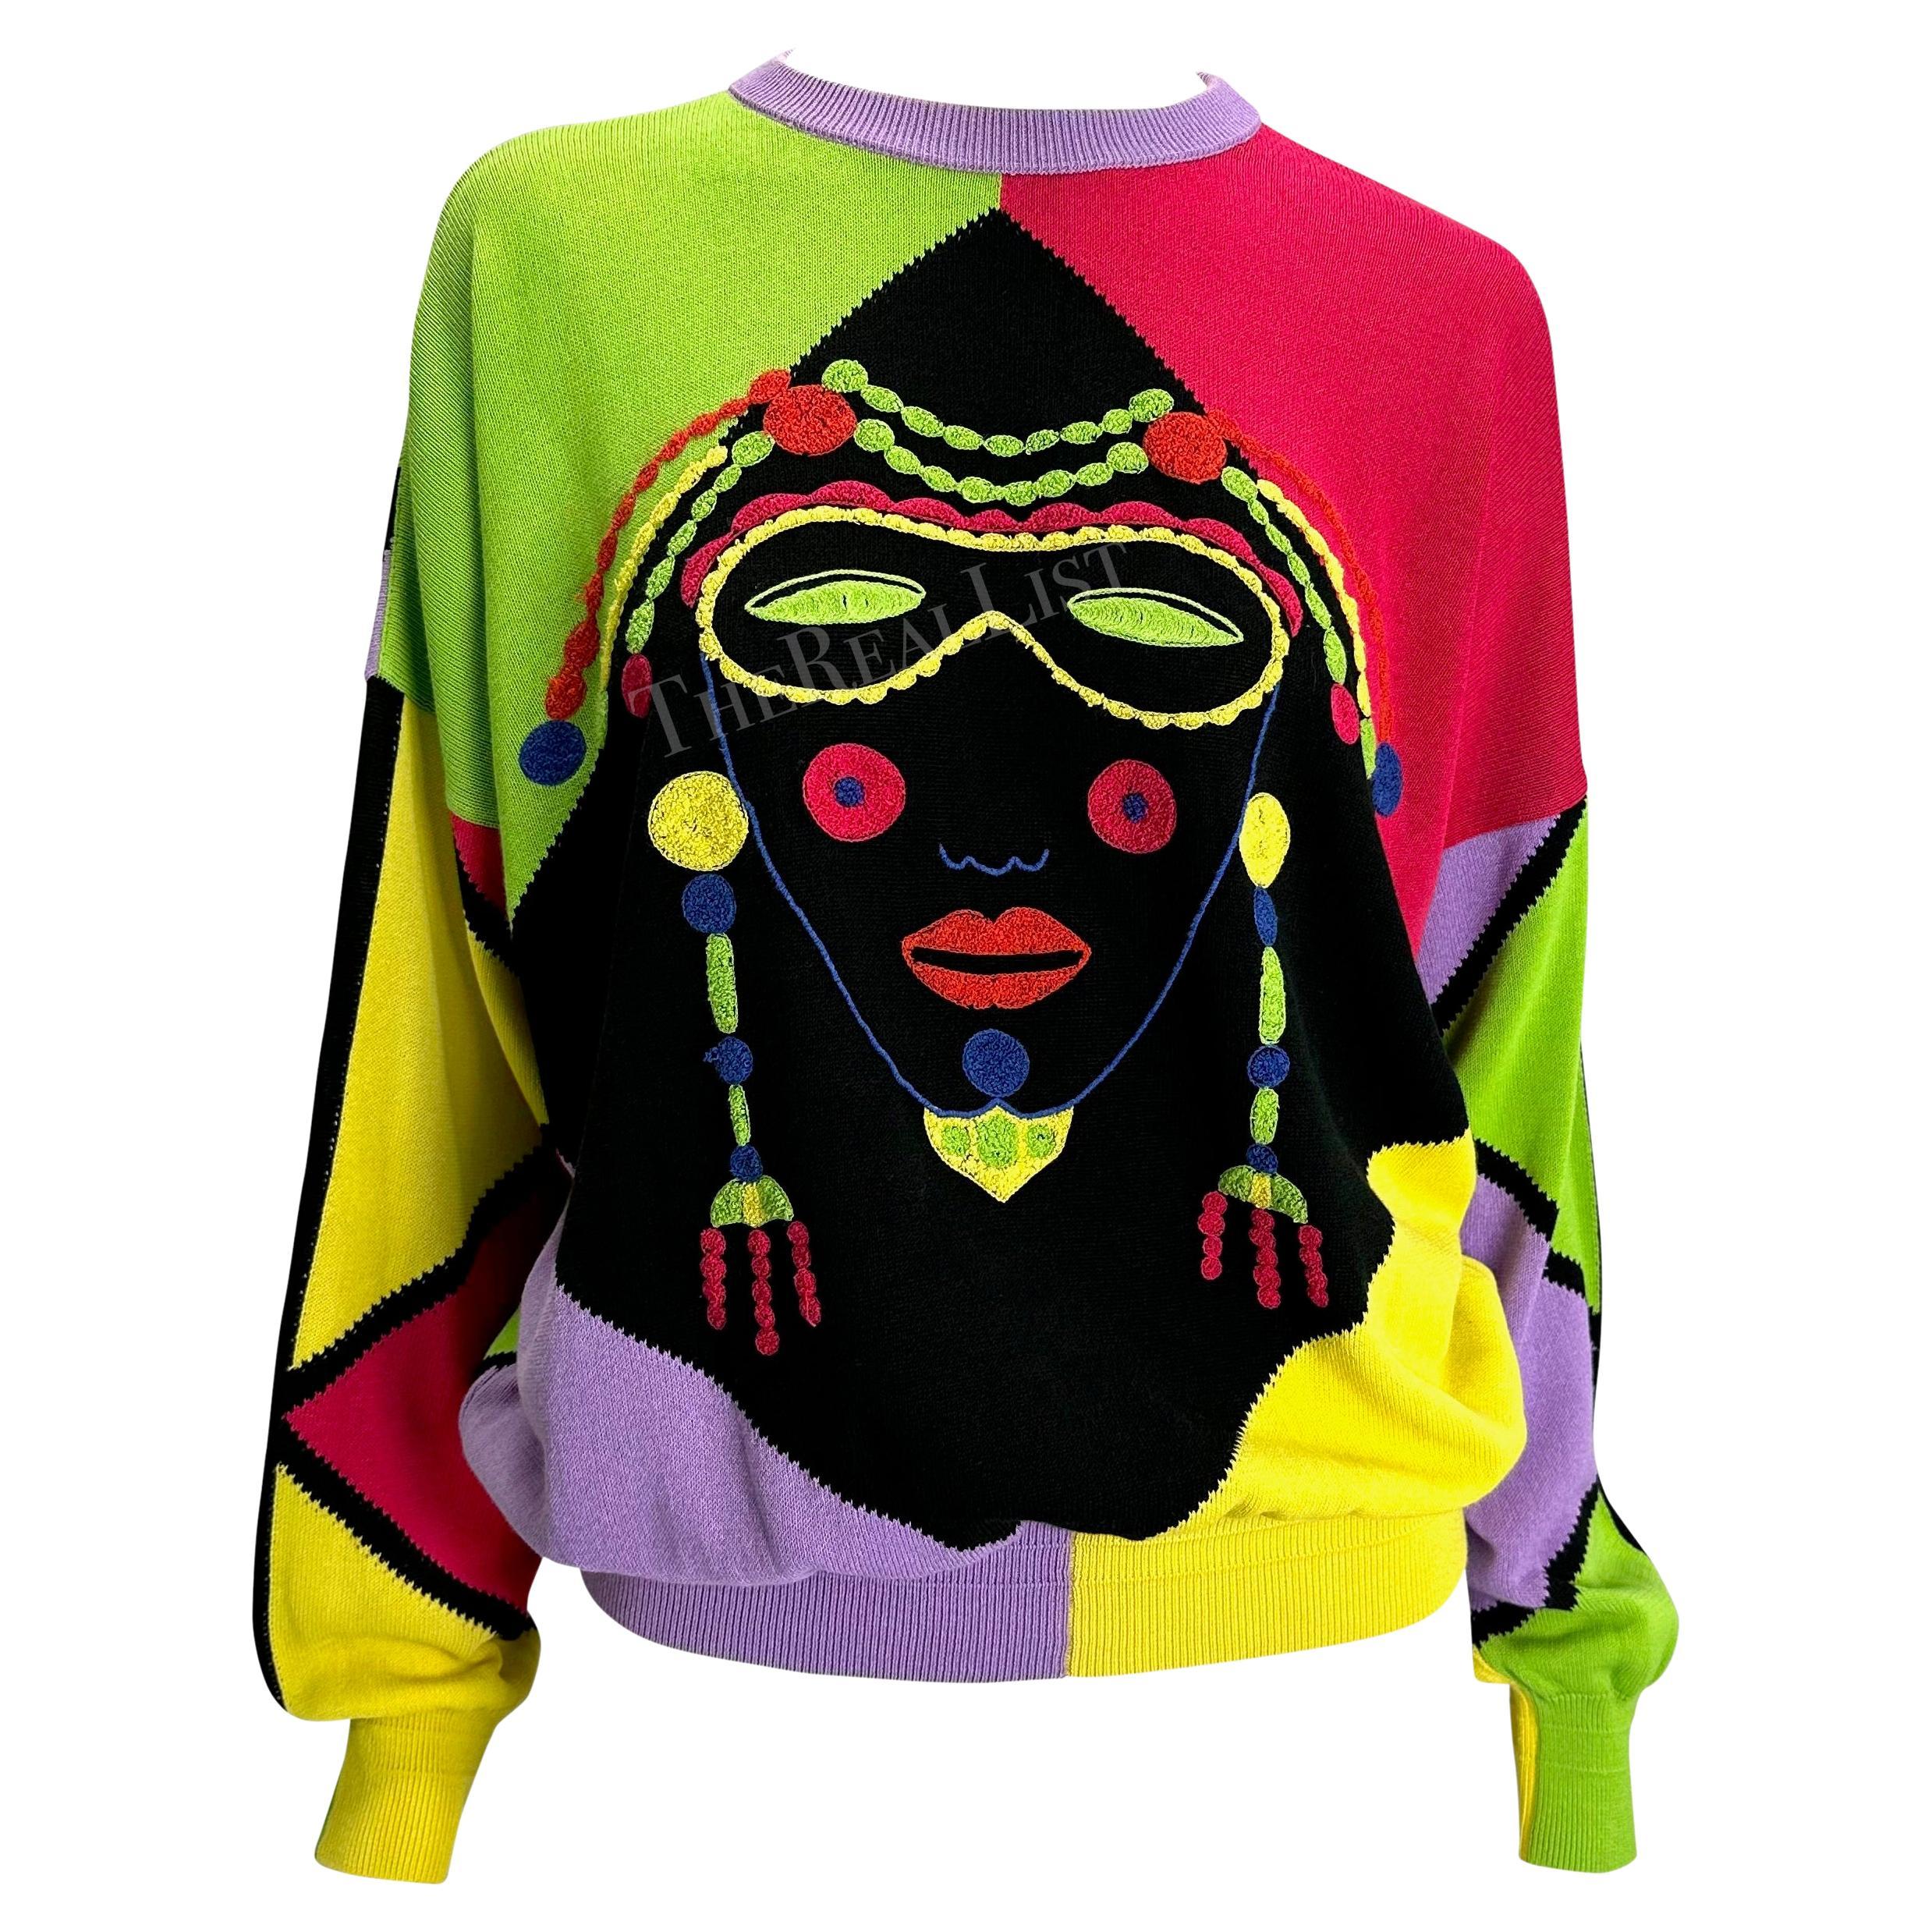 1990 Gianni Versace Men's Embroidered Multicolor Harlequin Face Sweater